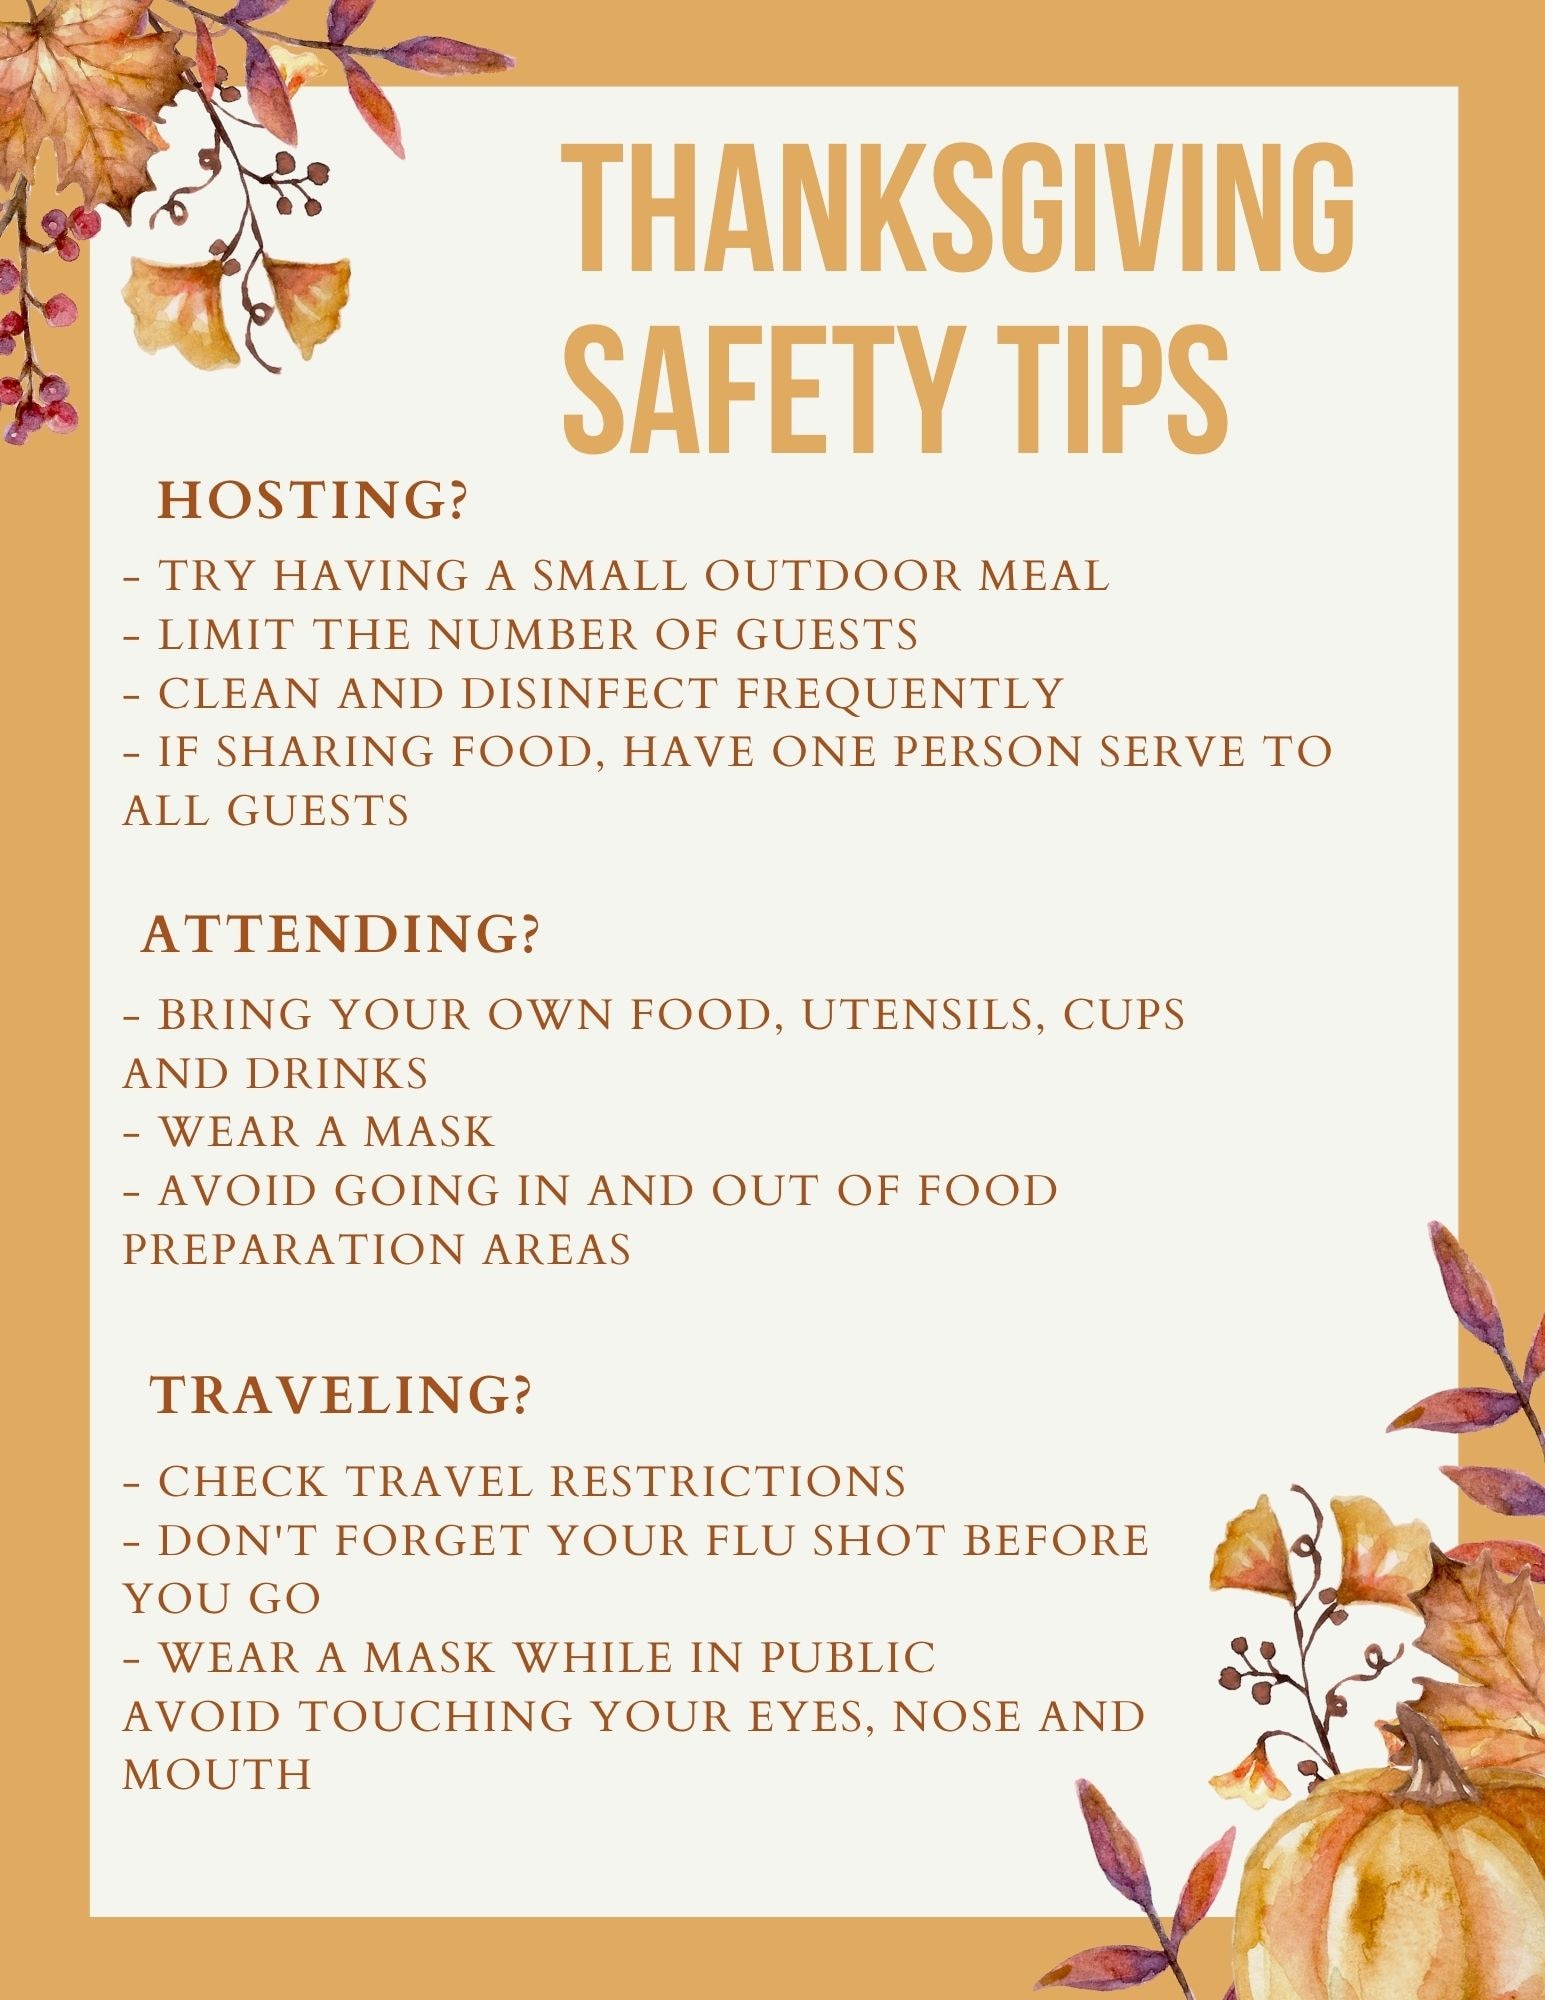 Thanksgiving Health and Safety Tips - Access Medical Associates